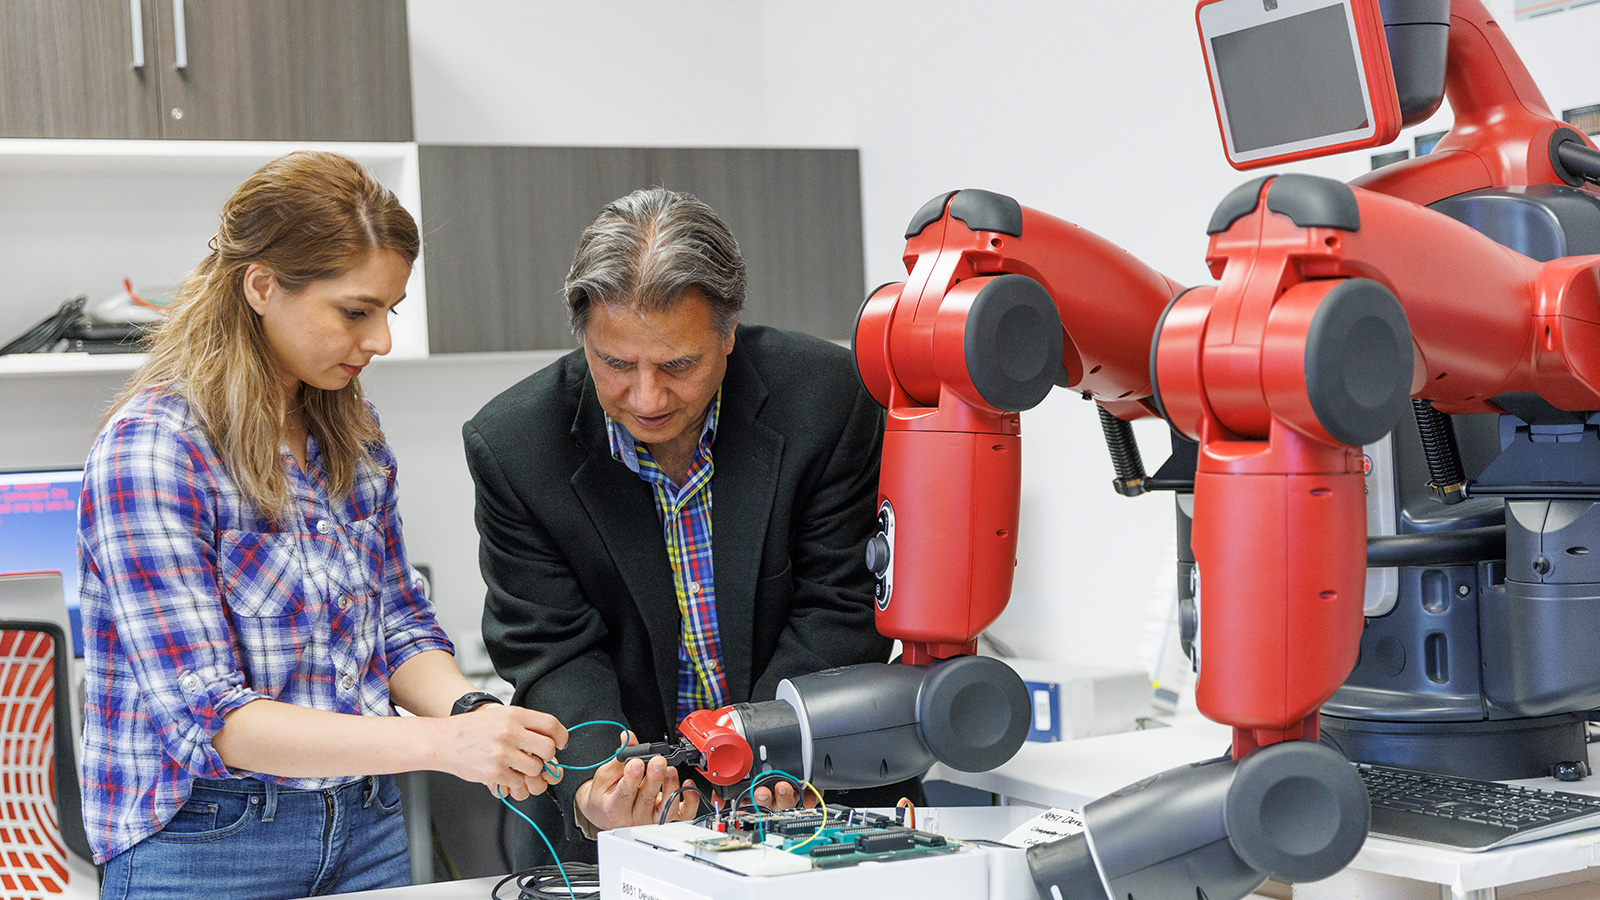 Professor and student working together with a robot in a lab.